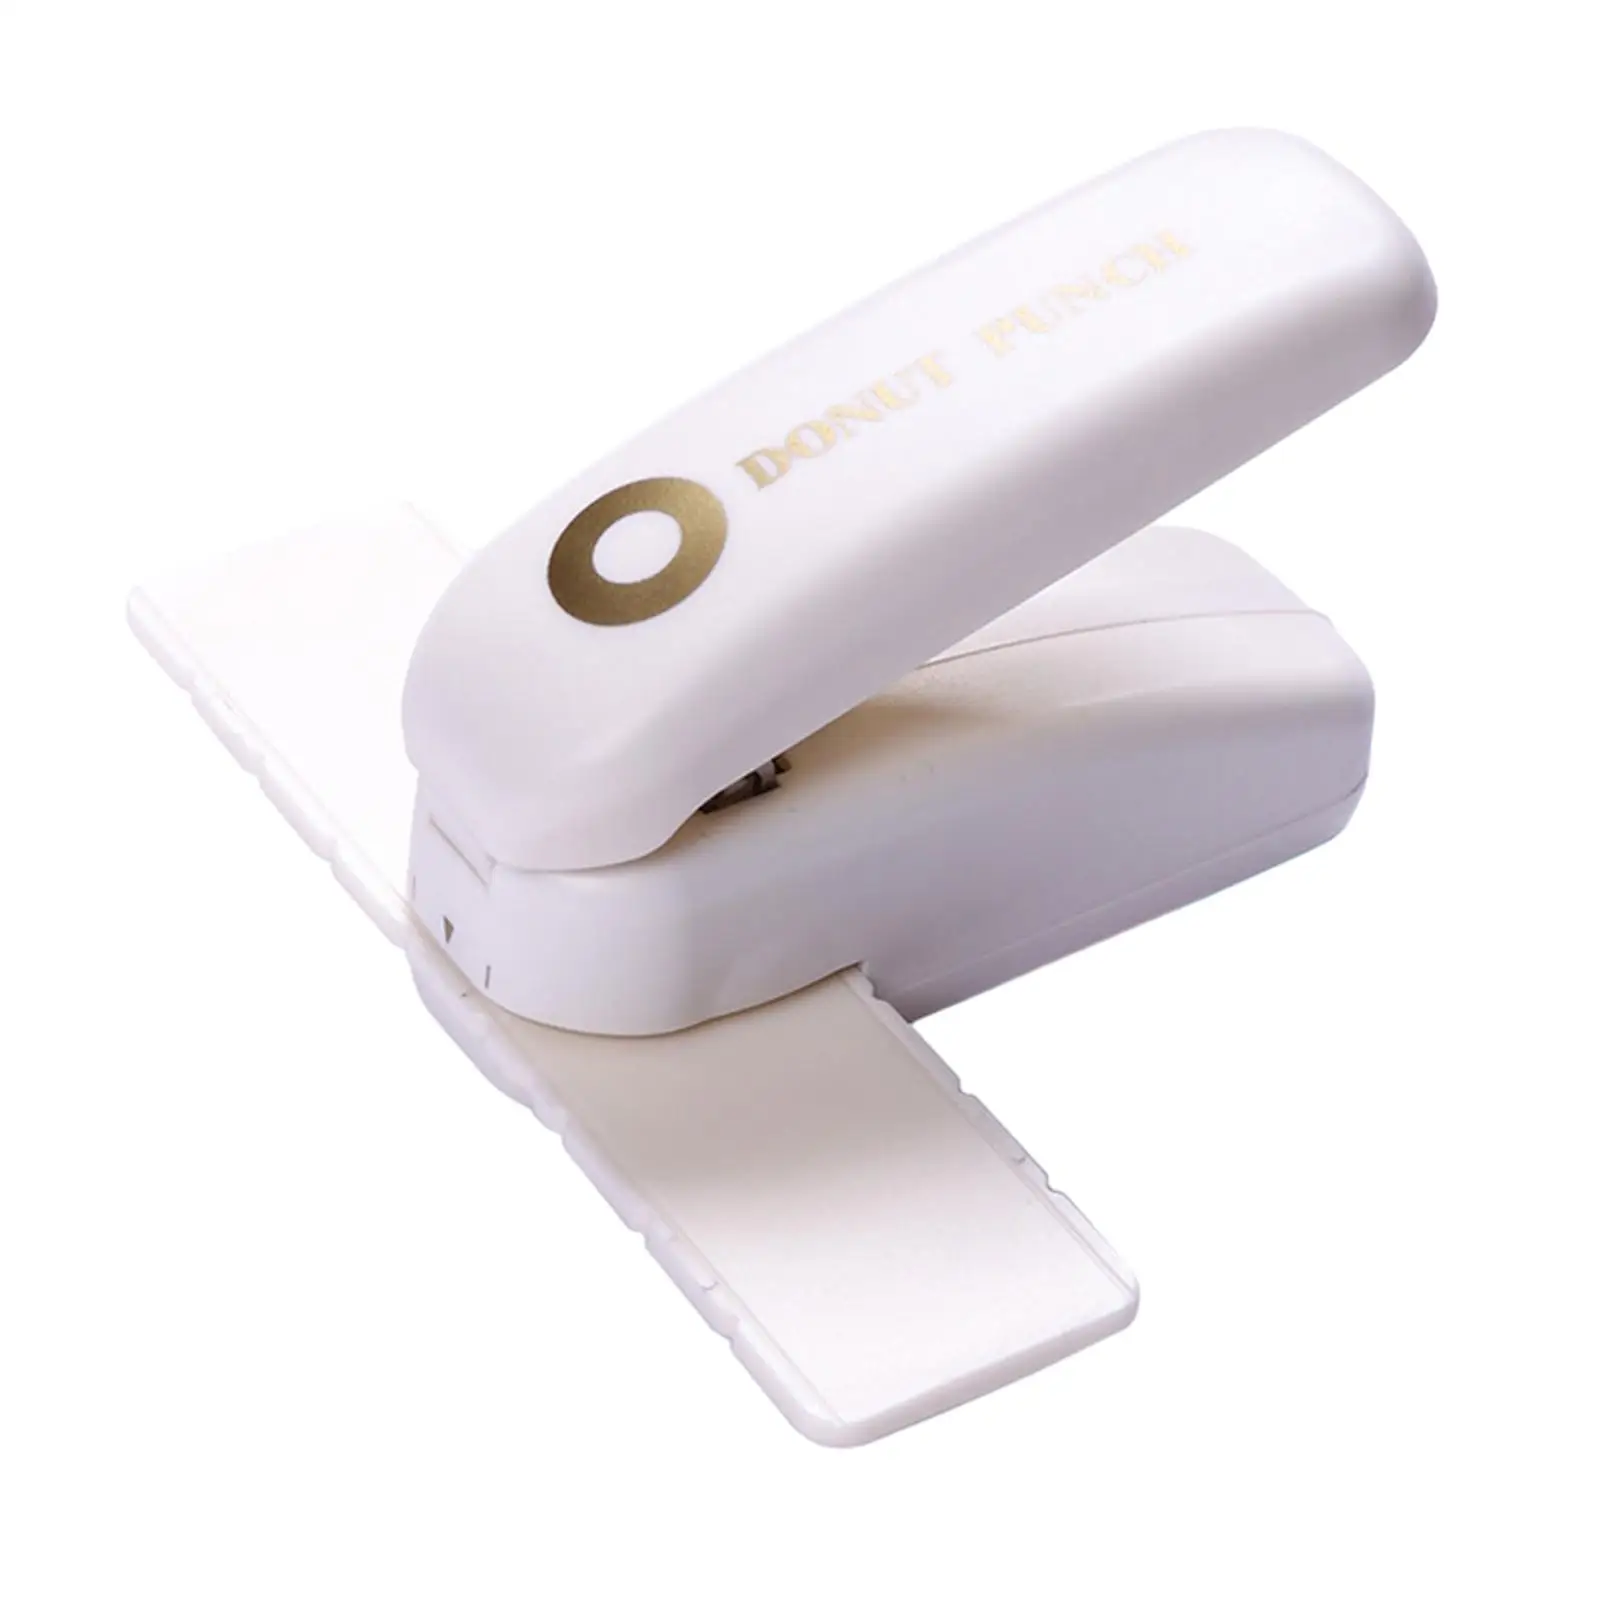 Hole Puncher, Loose Leaf Paper Hole Reinforcement Punch, Convenient Punching Tool, Paper Punch for Files Ticket Marking